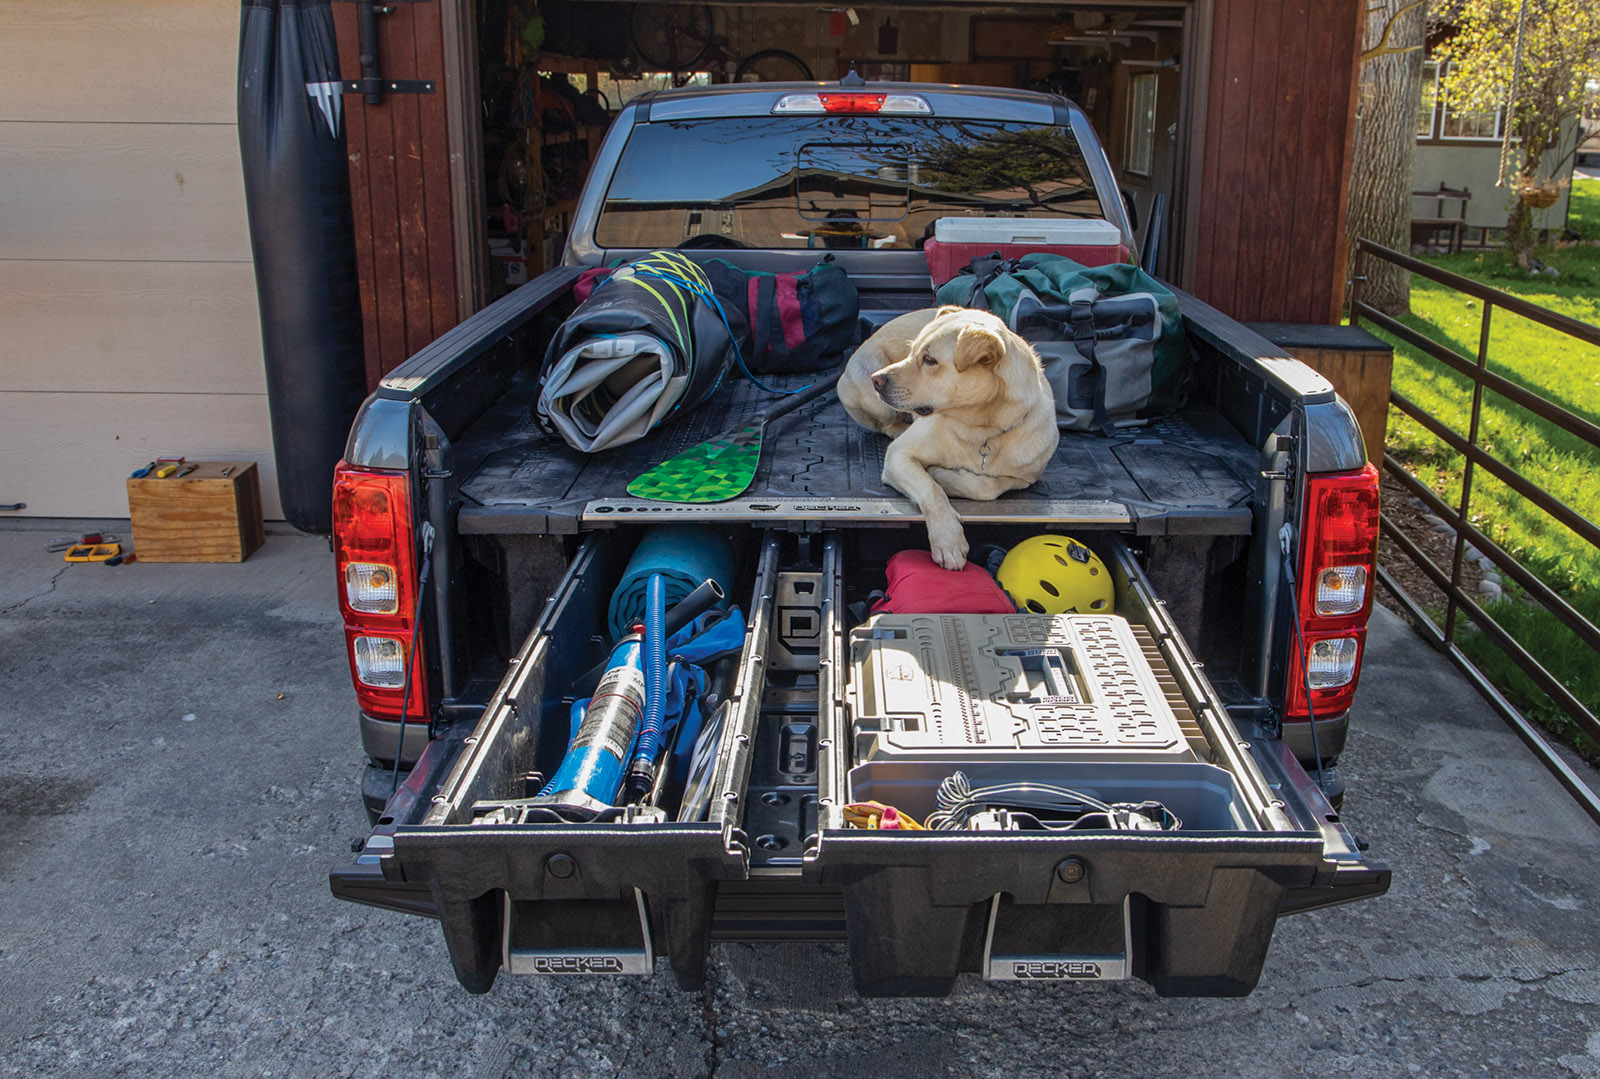 Decked Storage Systems Make Car Camping Easy- Sunset Magazine